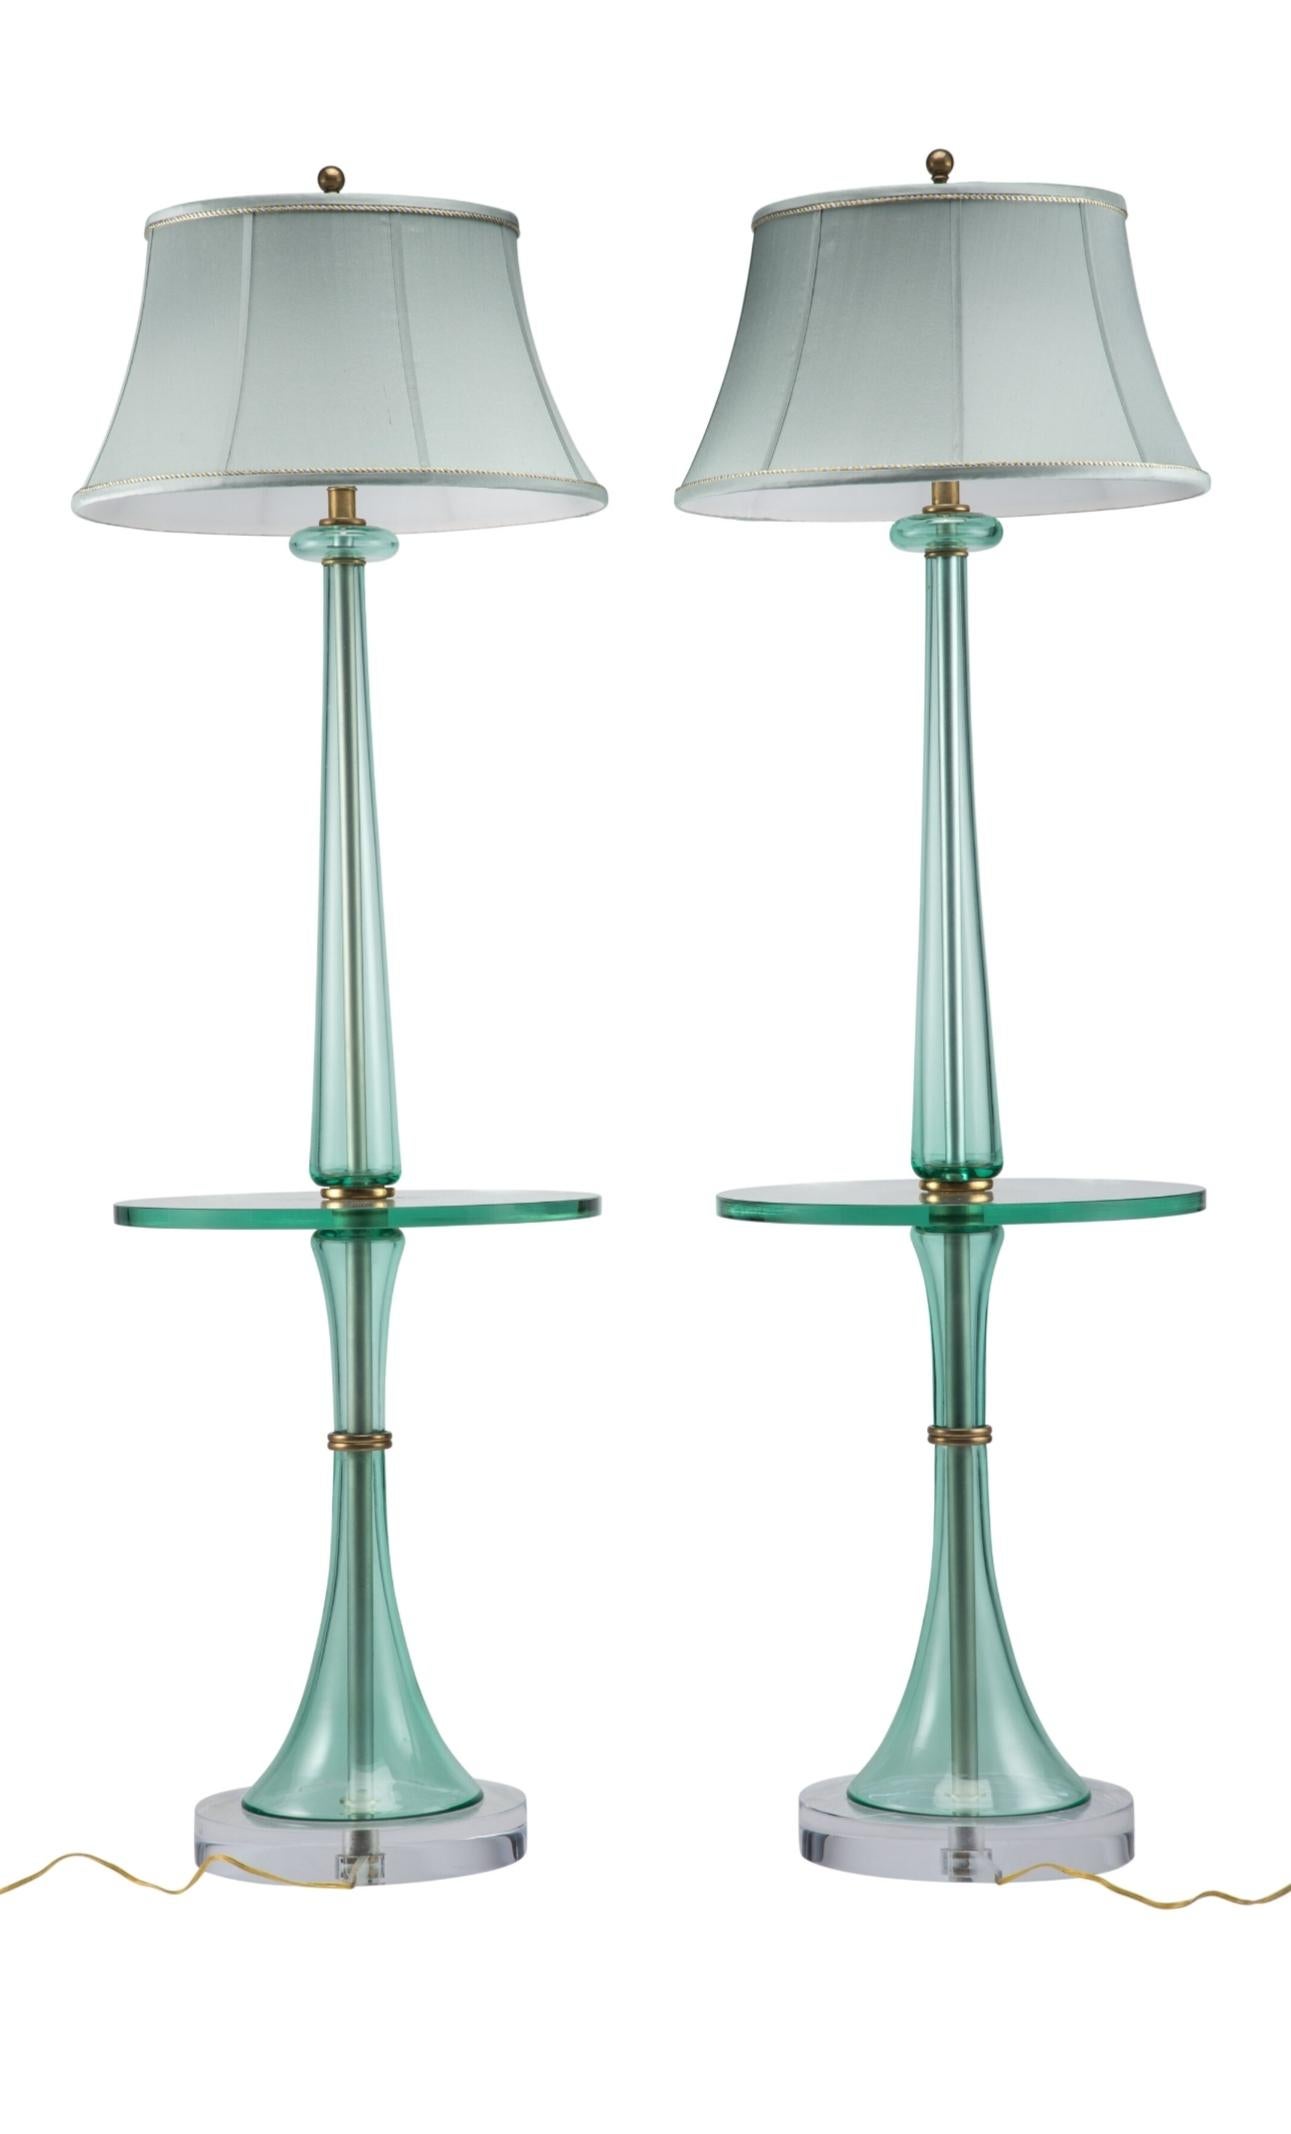 A fabulous pair of rare one-of-a-kind vintage Italian Murano art glass floor lamps by Marbro Lamp Company. 

Mid-Century Modern, fine quality, featuring an elegant sculptural silhouette, with integral circular floating glass shelf - tray table,